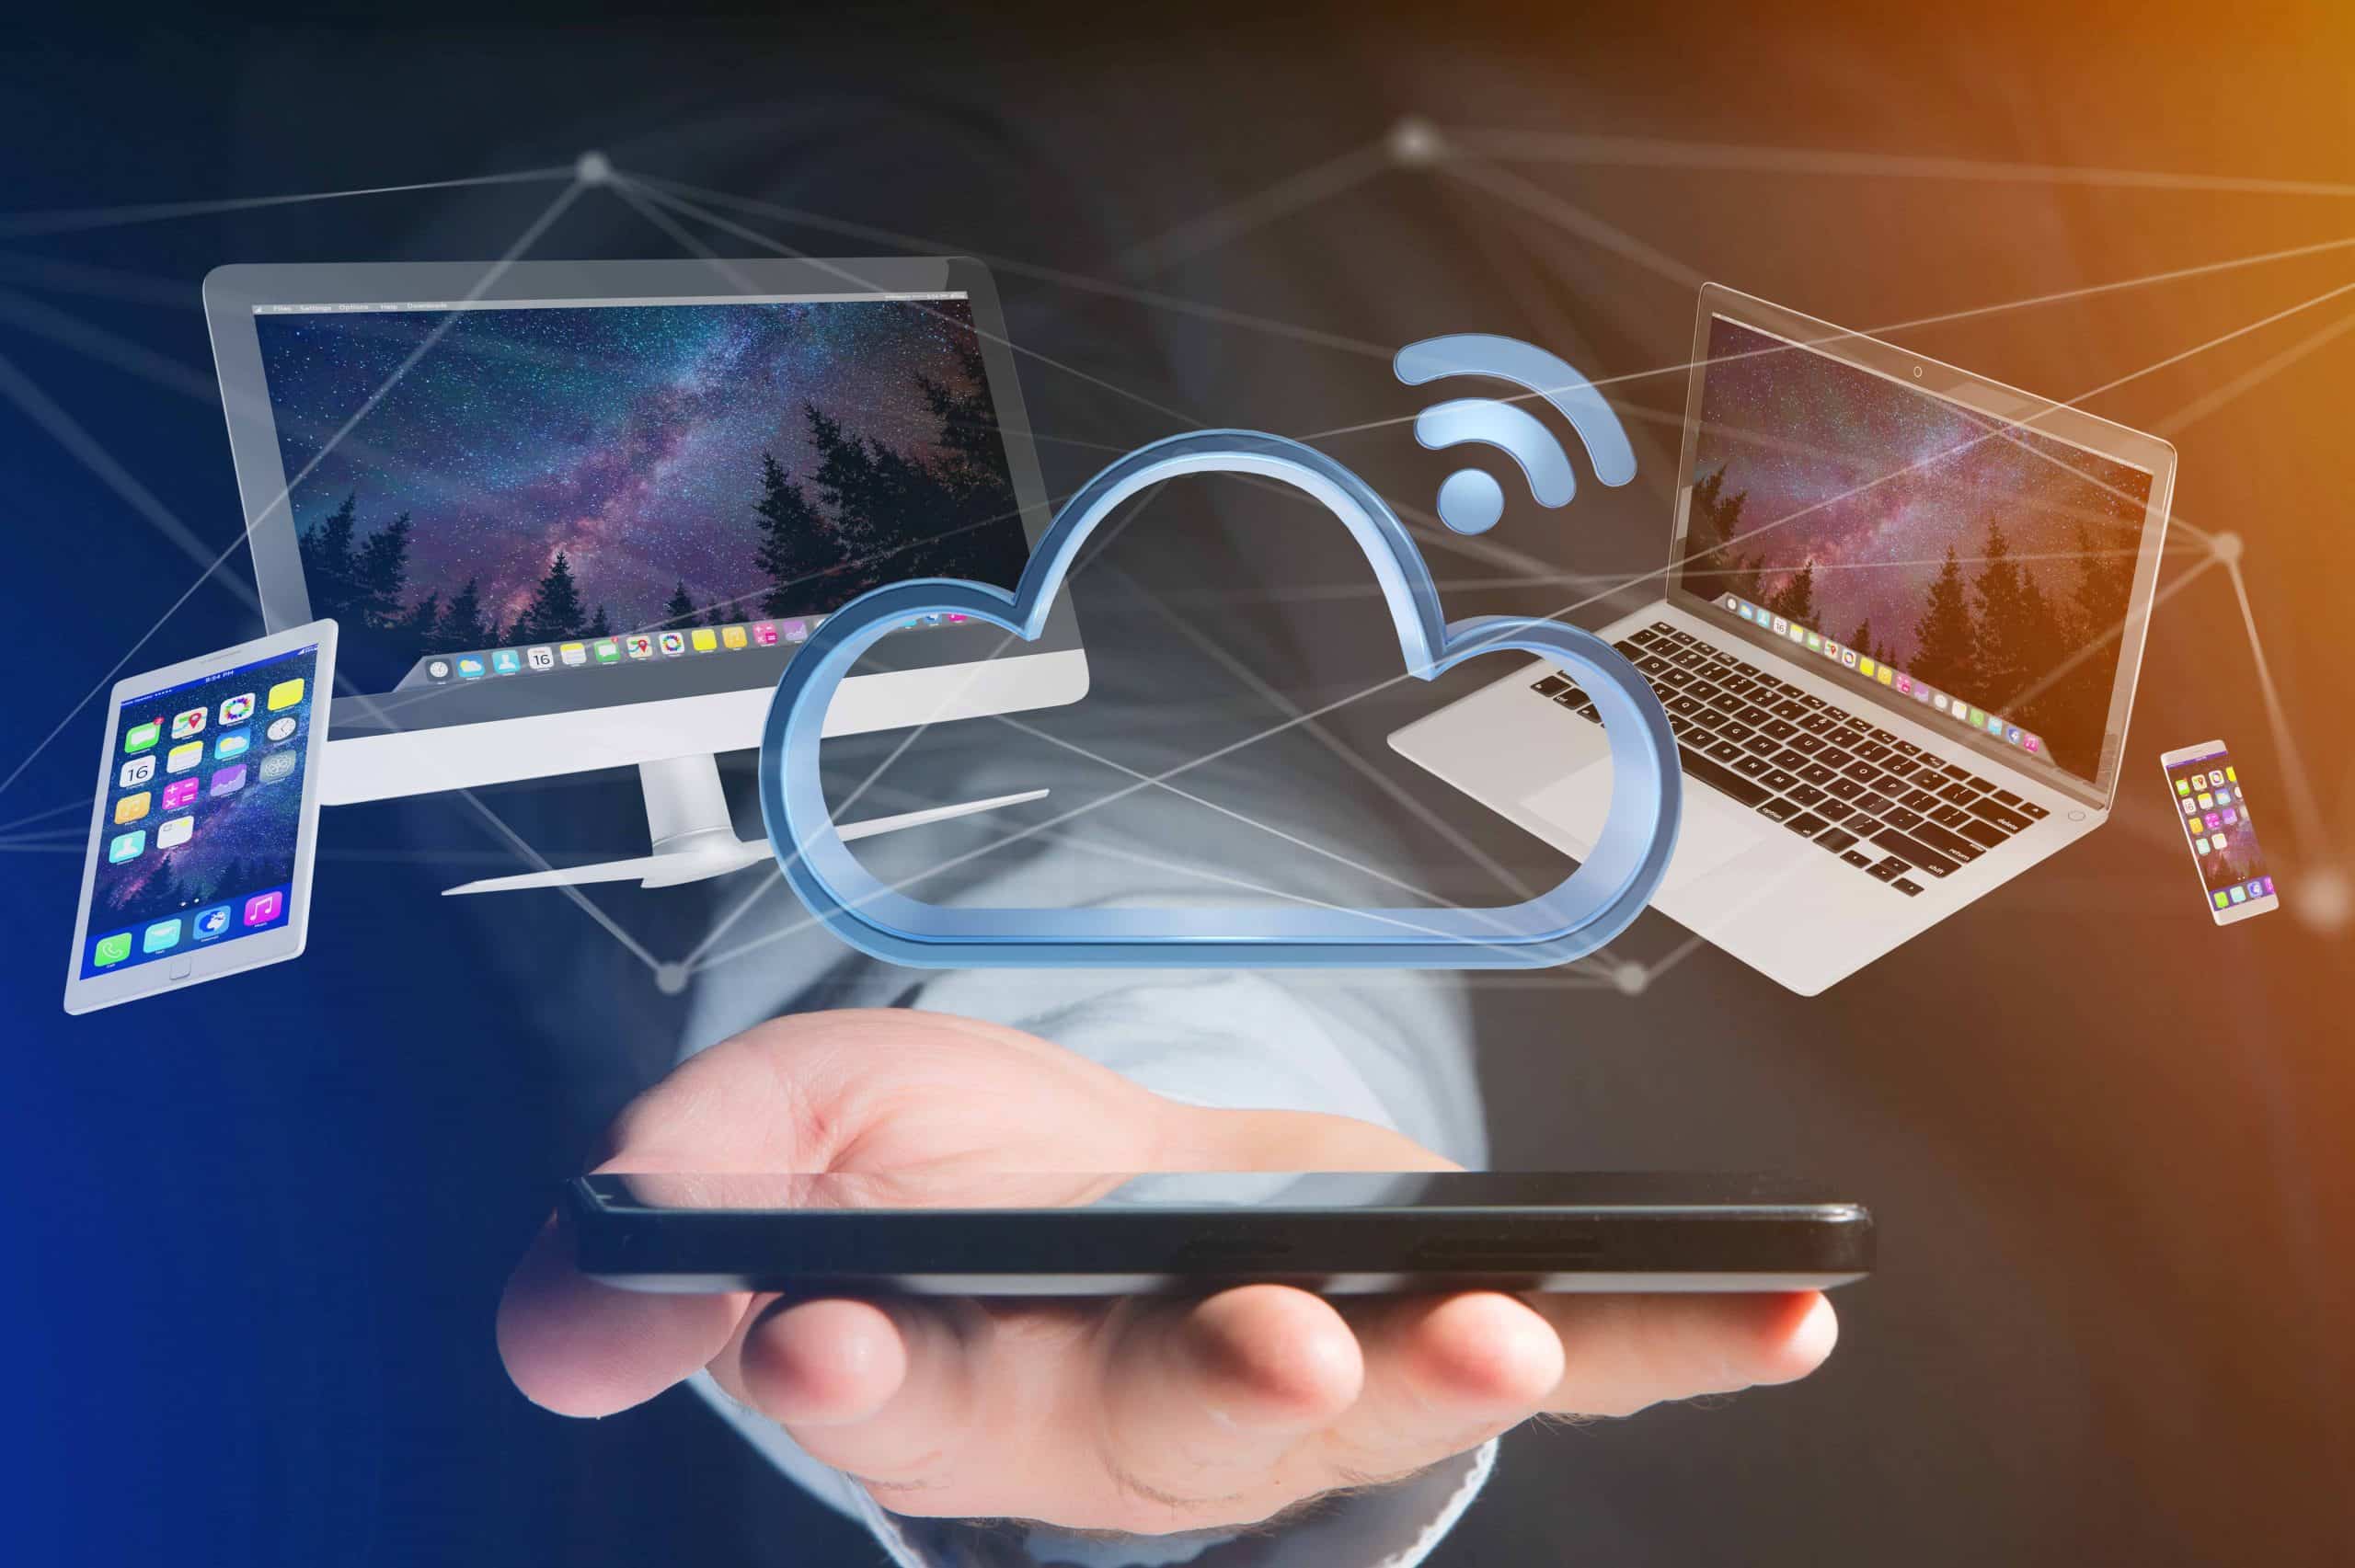 Devices like smartphone tablet or computer flying over connected cloud